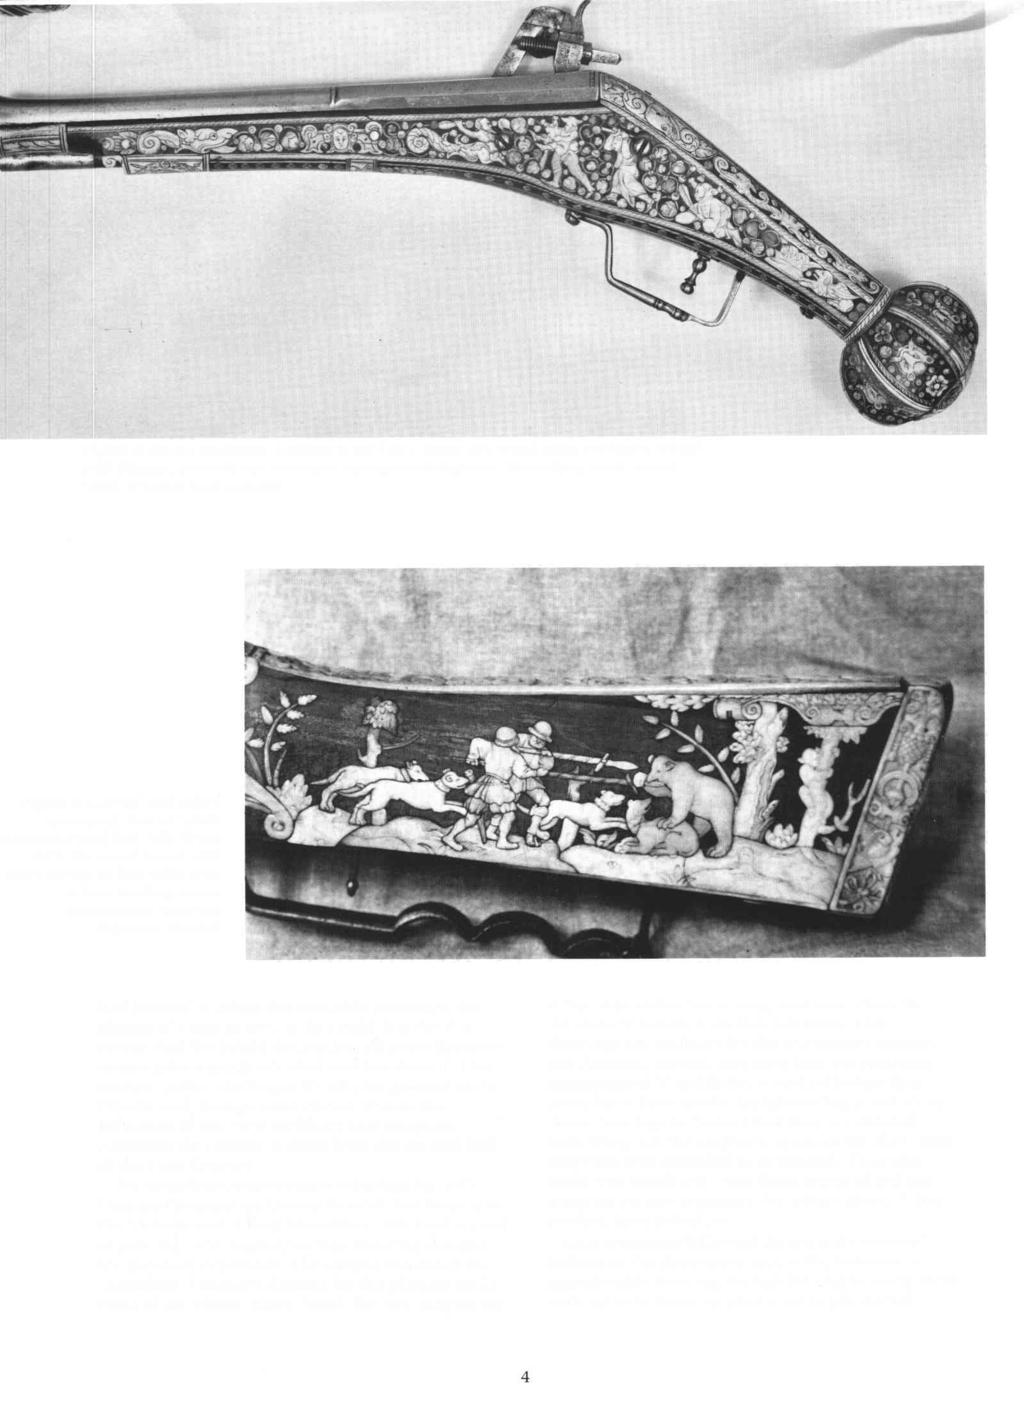 Figure 2. Inlaid ornament: German wheel lock pistol, the wood stock profusely inlaid with figures, animals and monsters in engraved staghorn. Nuremberg mark, about 1580. Wallace Coll. London Figure 3.